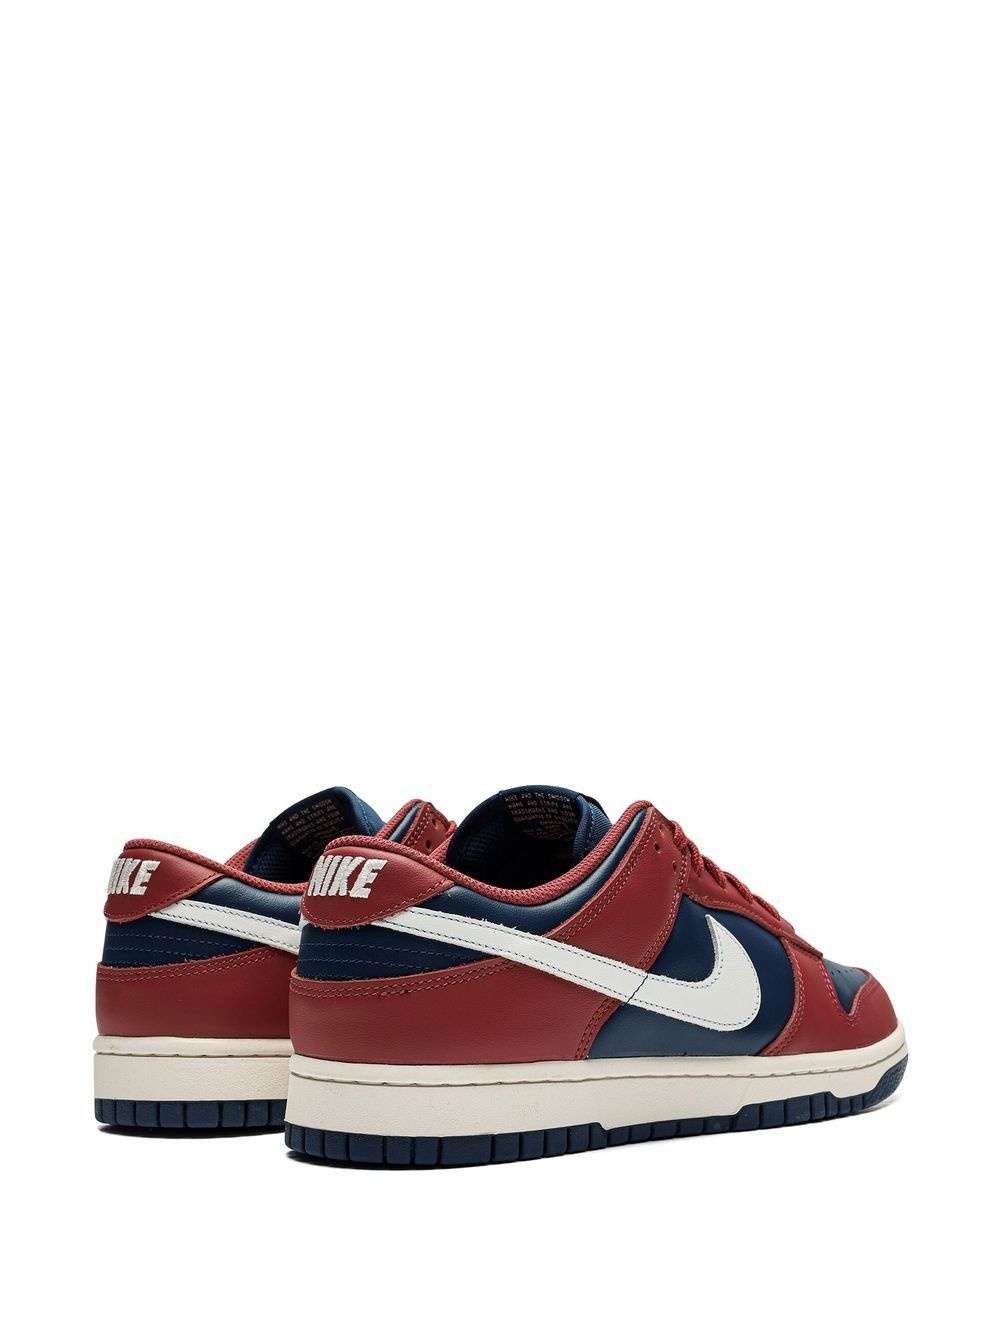 Dunk Low Retro "Canyon Rust" sneakers - 3